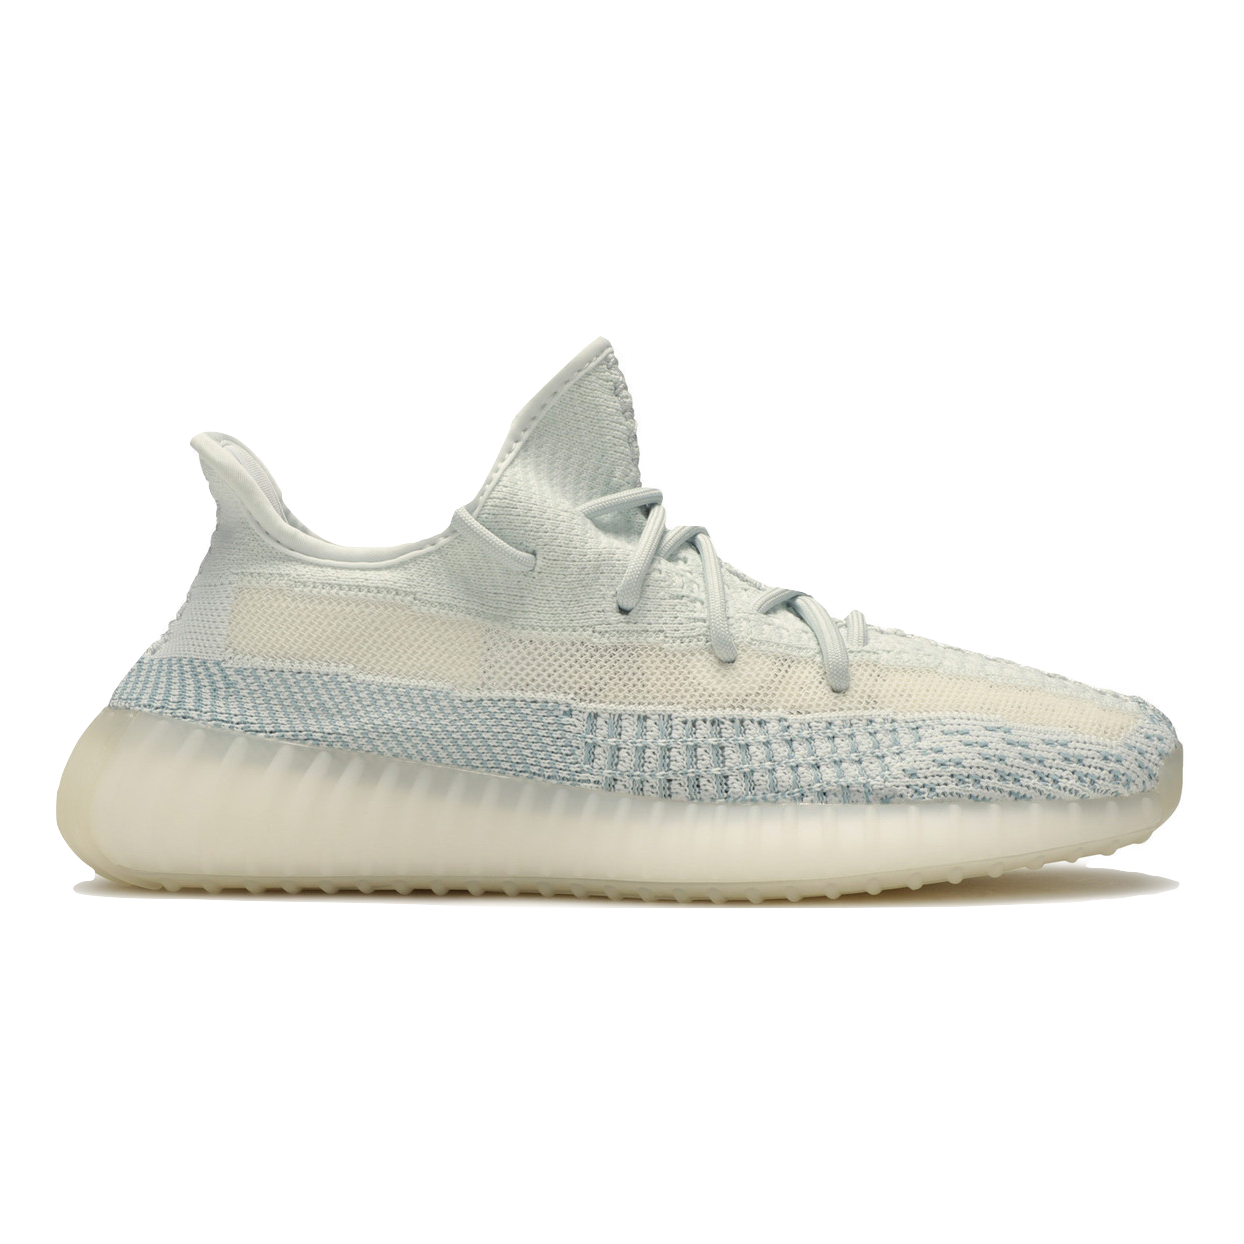 Yeezy Boost 350 V2 - Cloud White Non Reflective